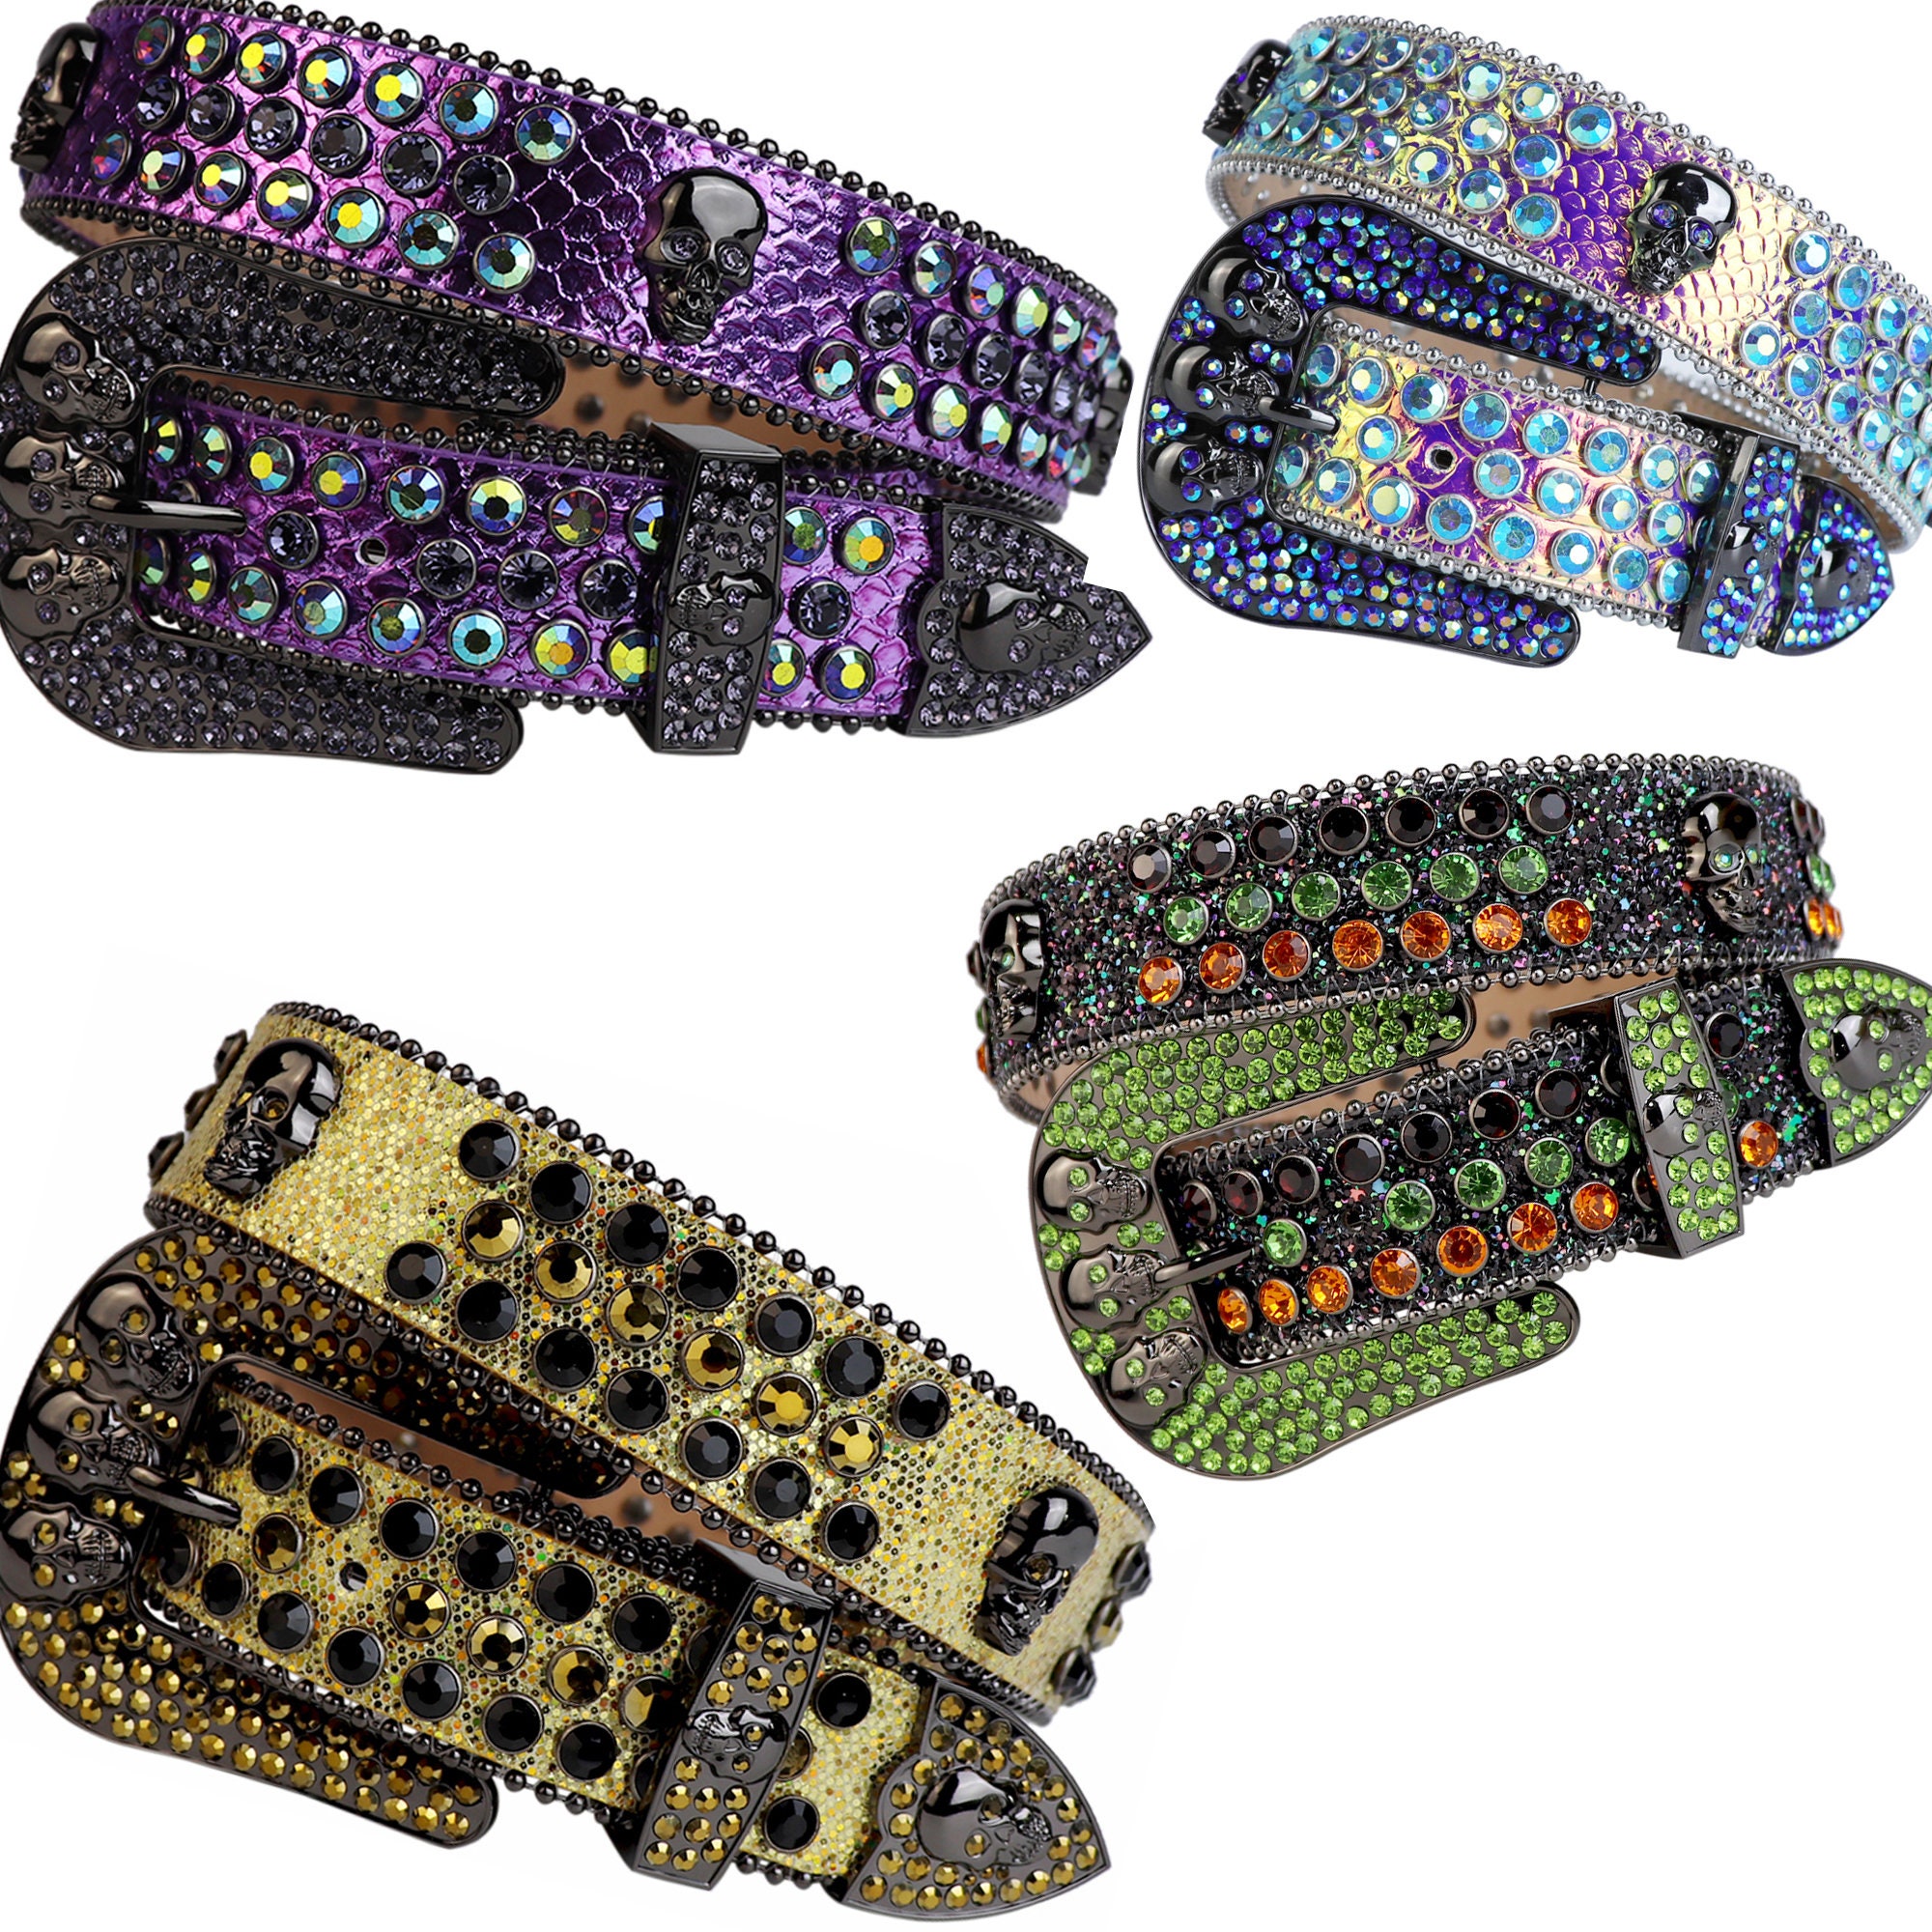 Western Rhinestone Belts Bling Skull Cowgirl Rodeo Fair Cowboy Buckle Sparkly Belt S M L XL New Red Blue Purple Black Gold White